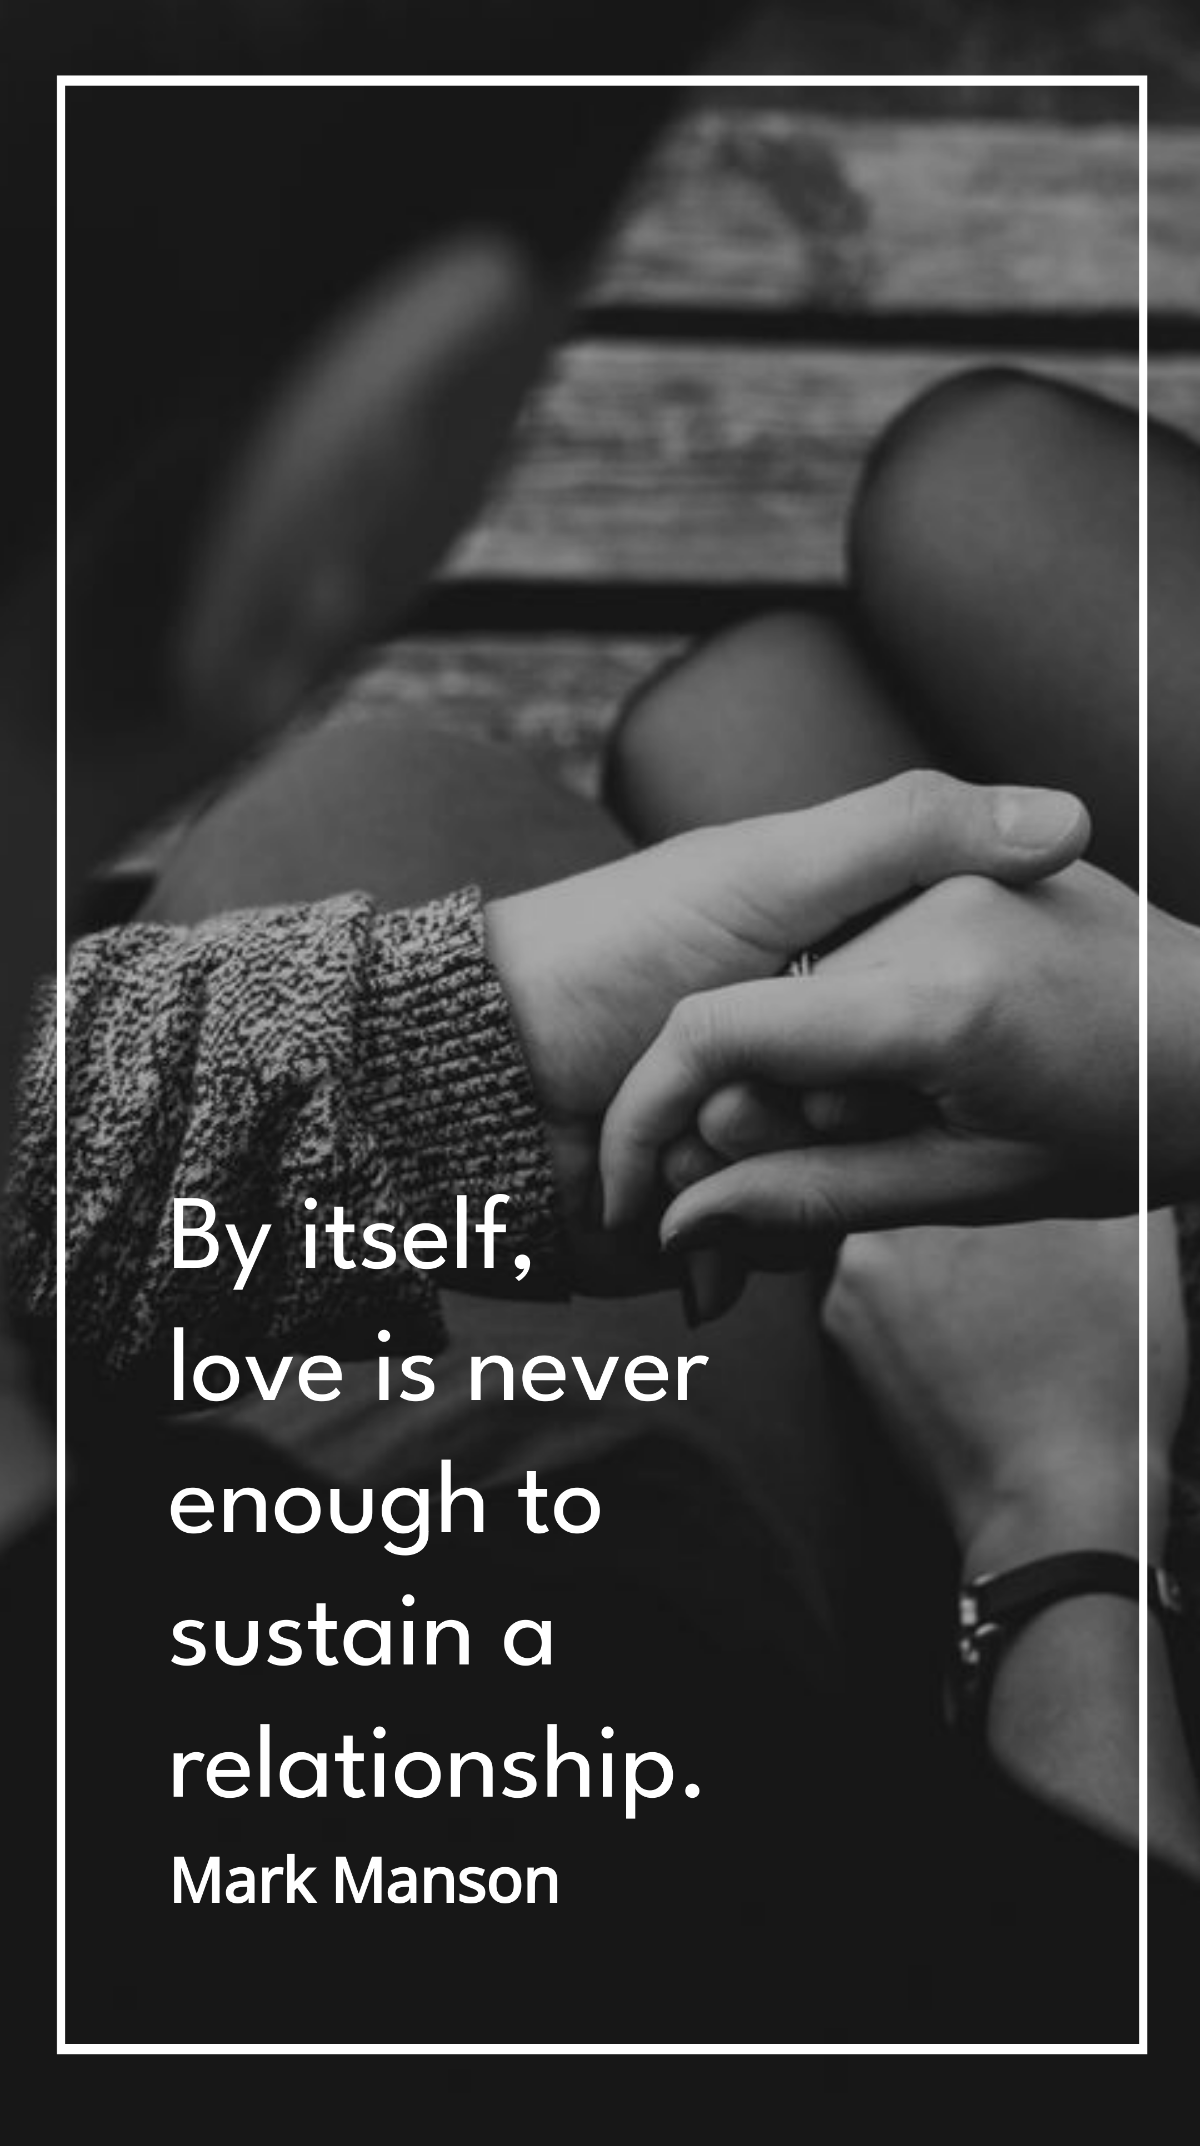 Mark Manson - By itself, love is never enough to sustain a relationship. Template